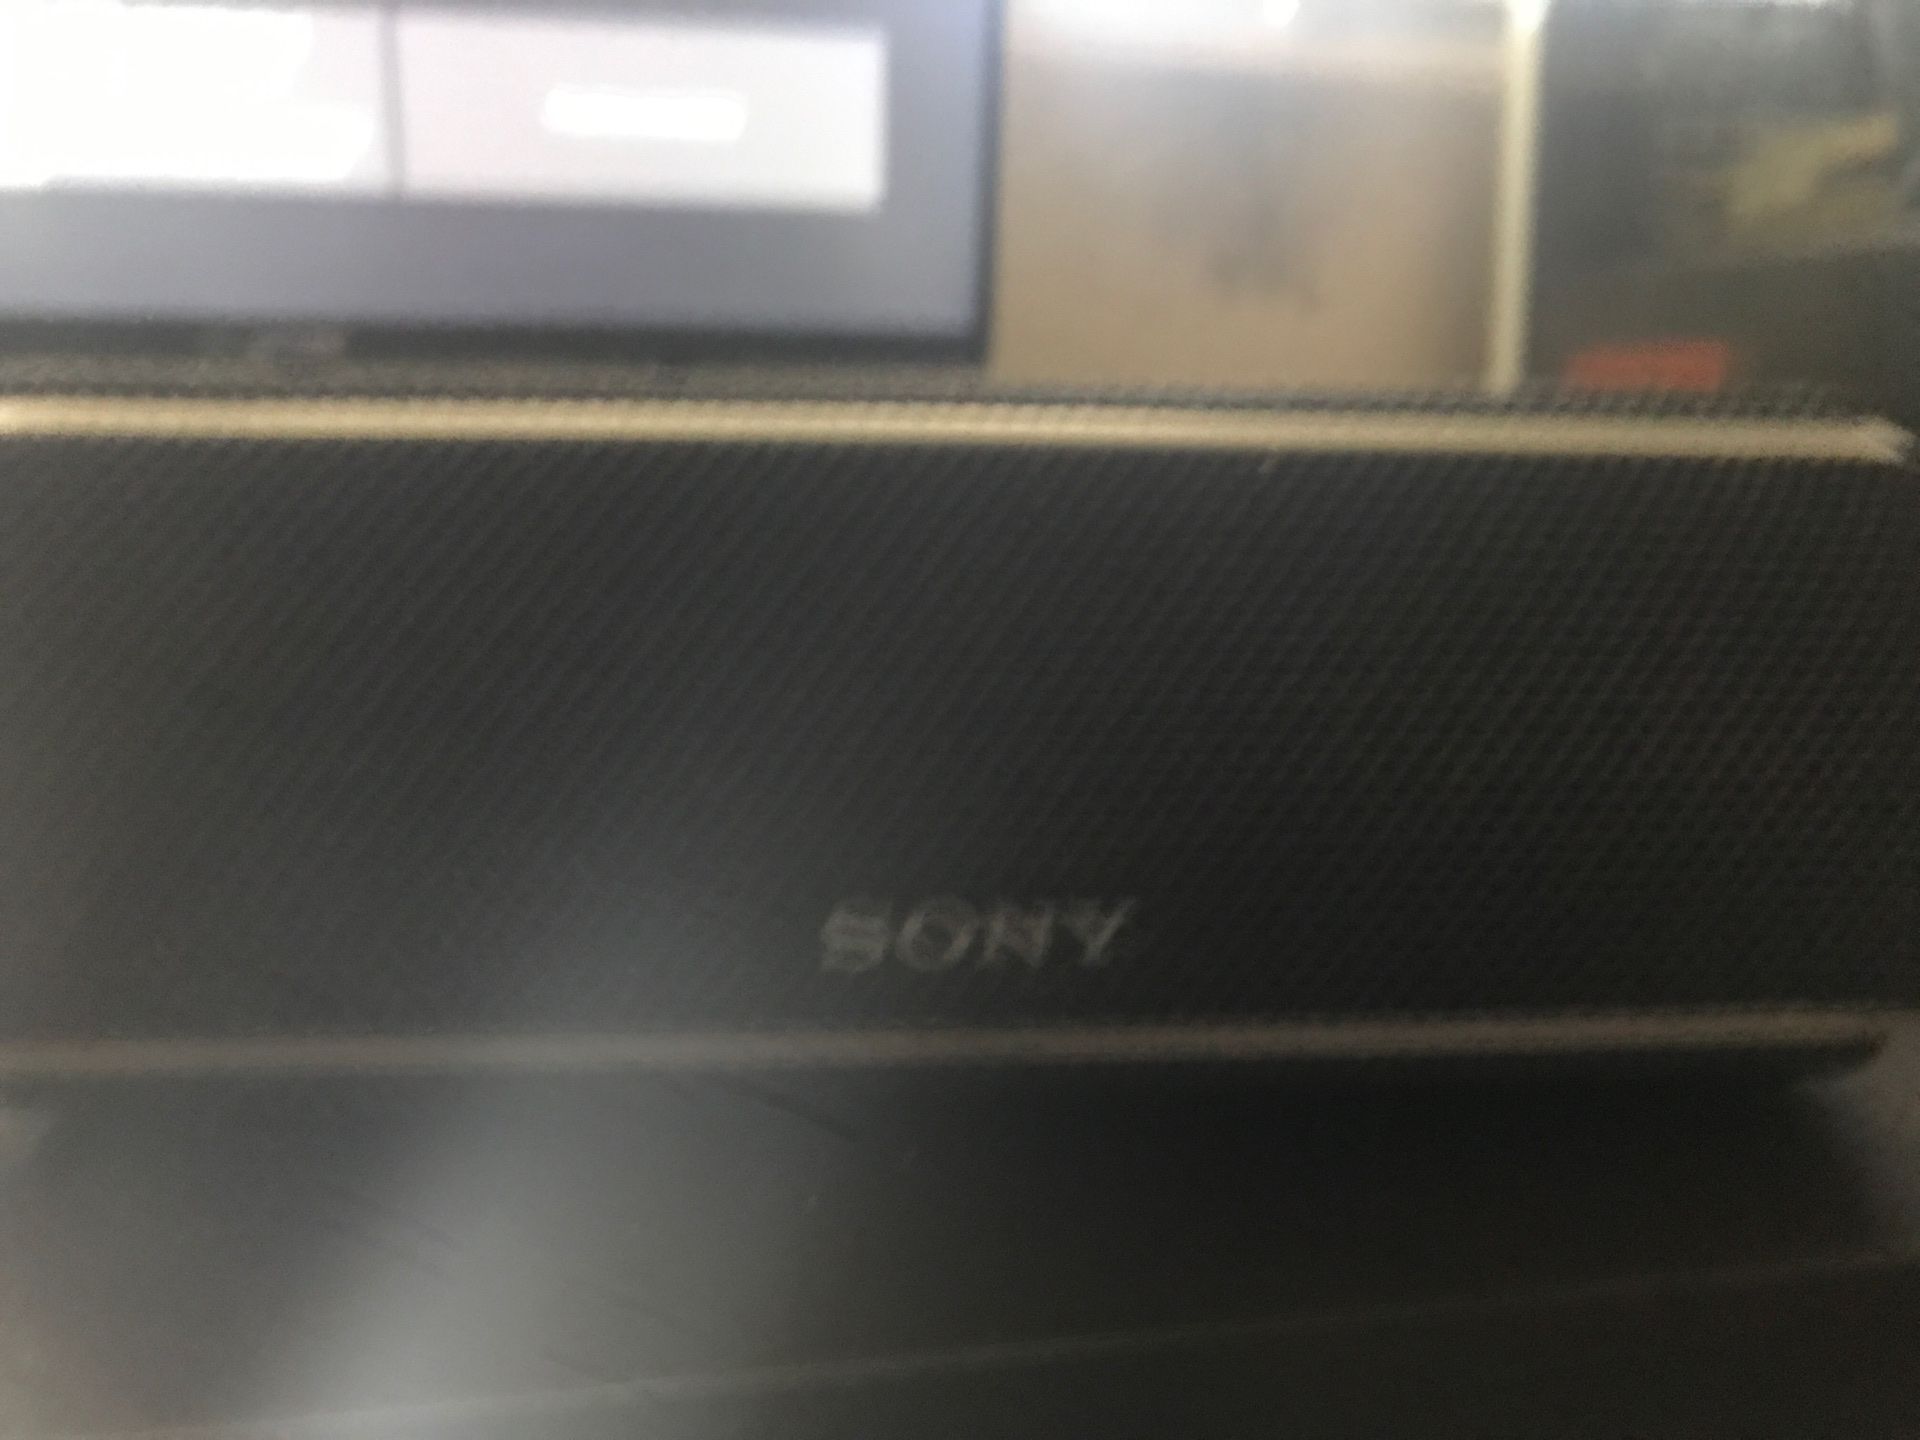 Sony Speaker with LEDs